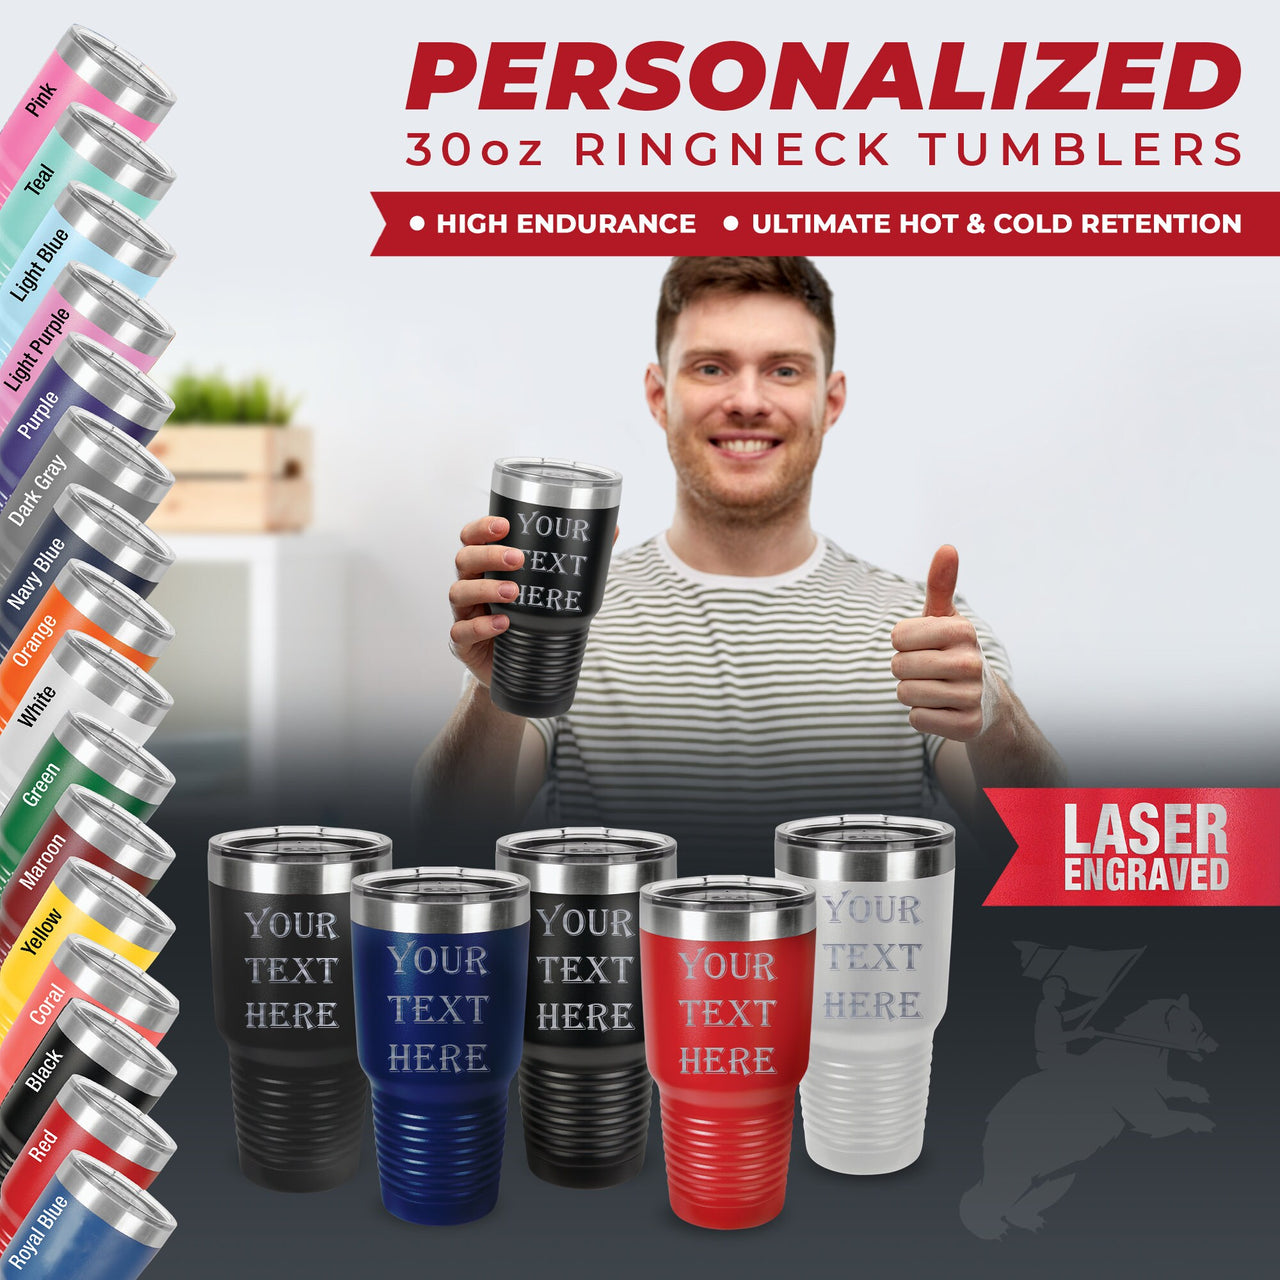 30oz Tumblers, Your Text Here Custom Tumblers, Personalized Insulated Tumbler, Laser Engraved Personalized Cup, Personalized Gift for Him